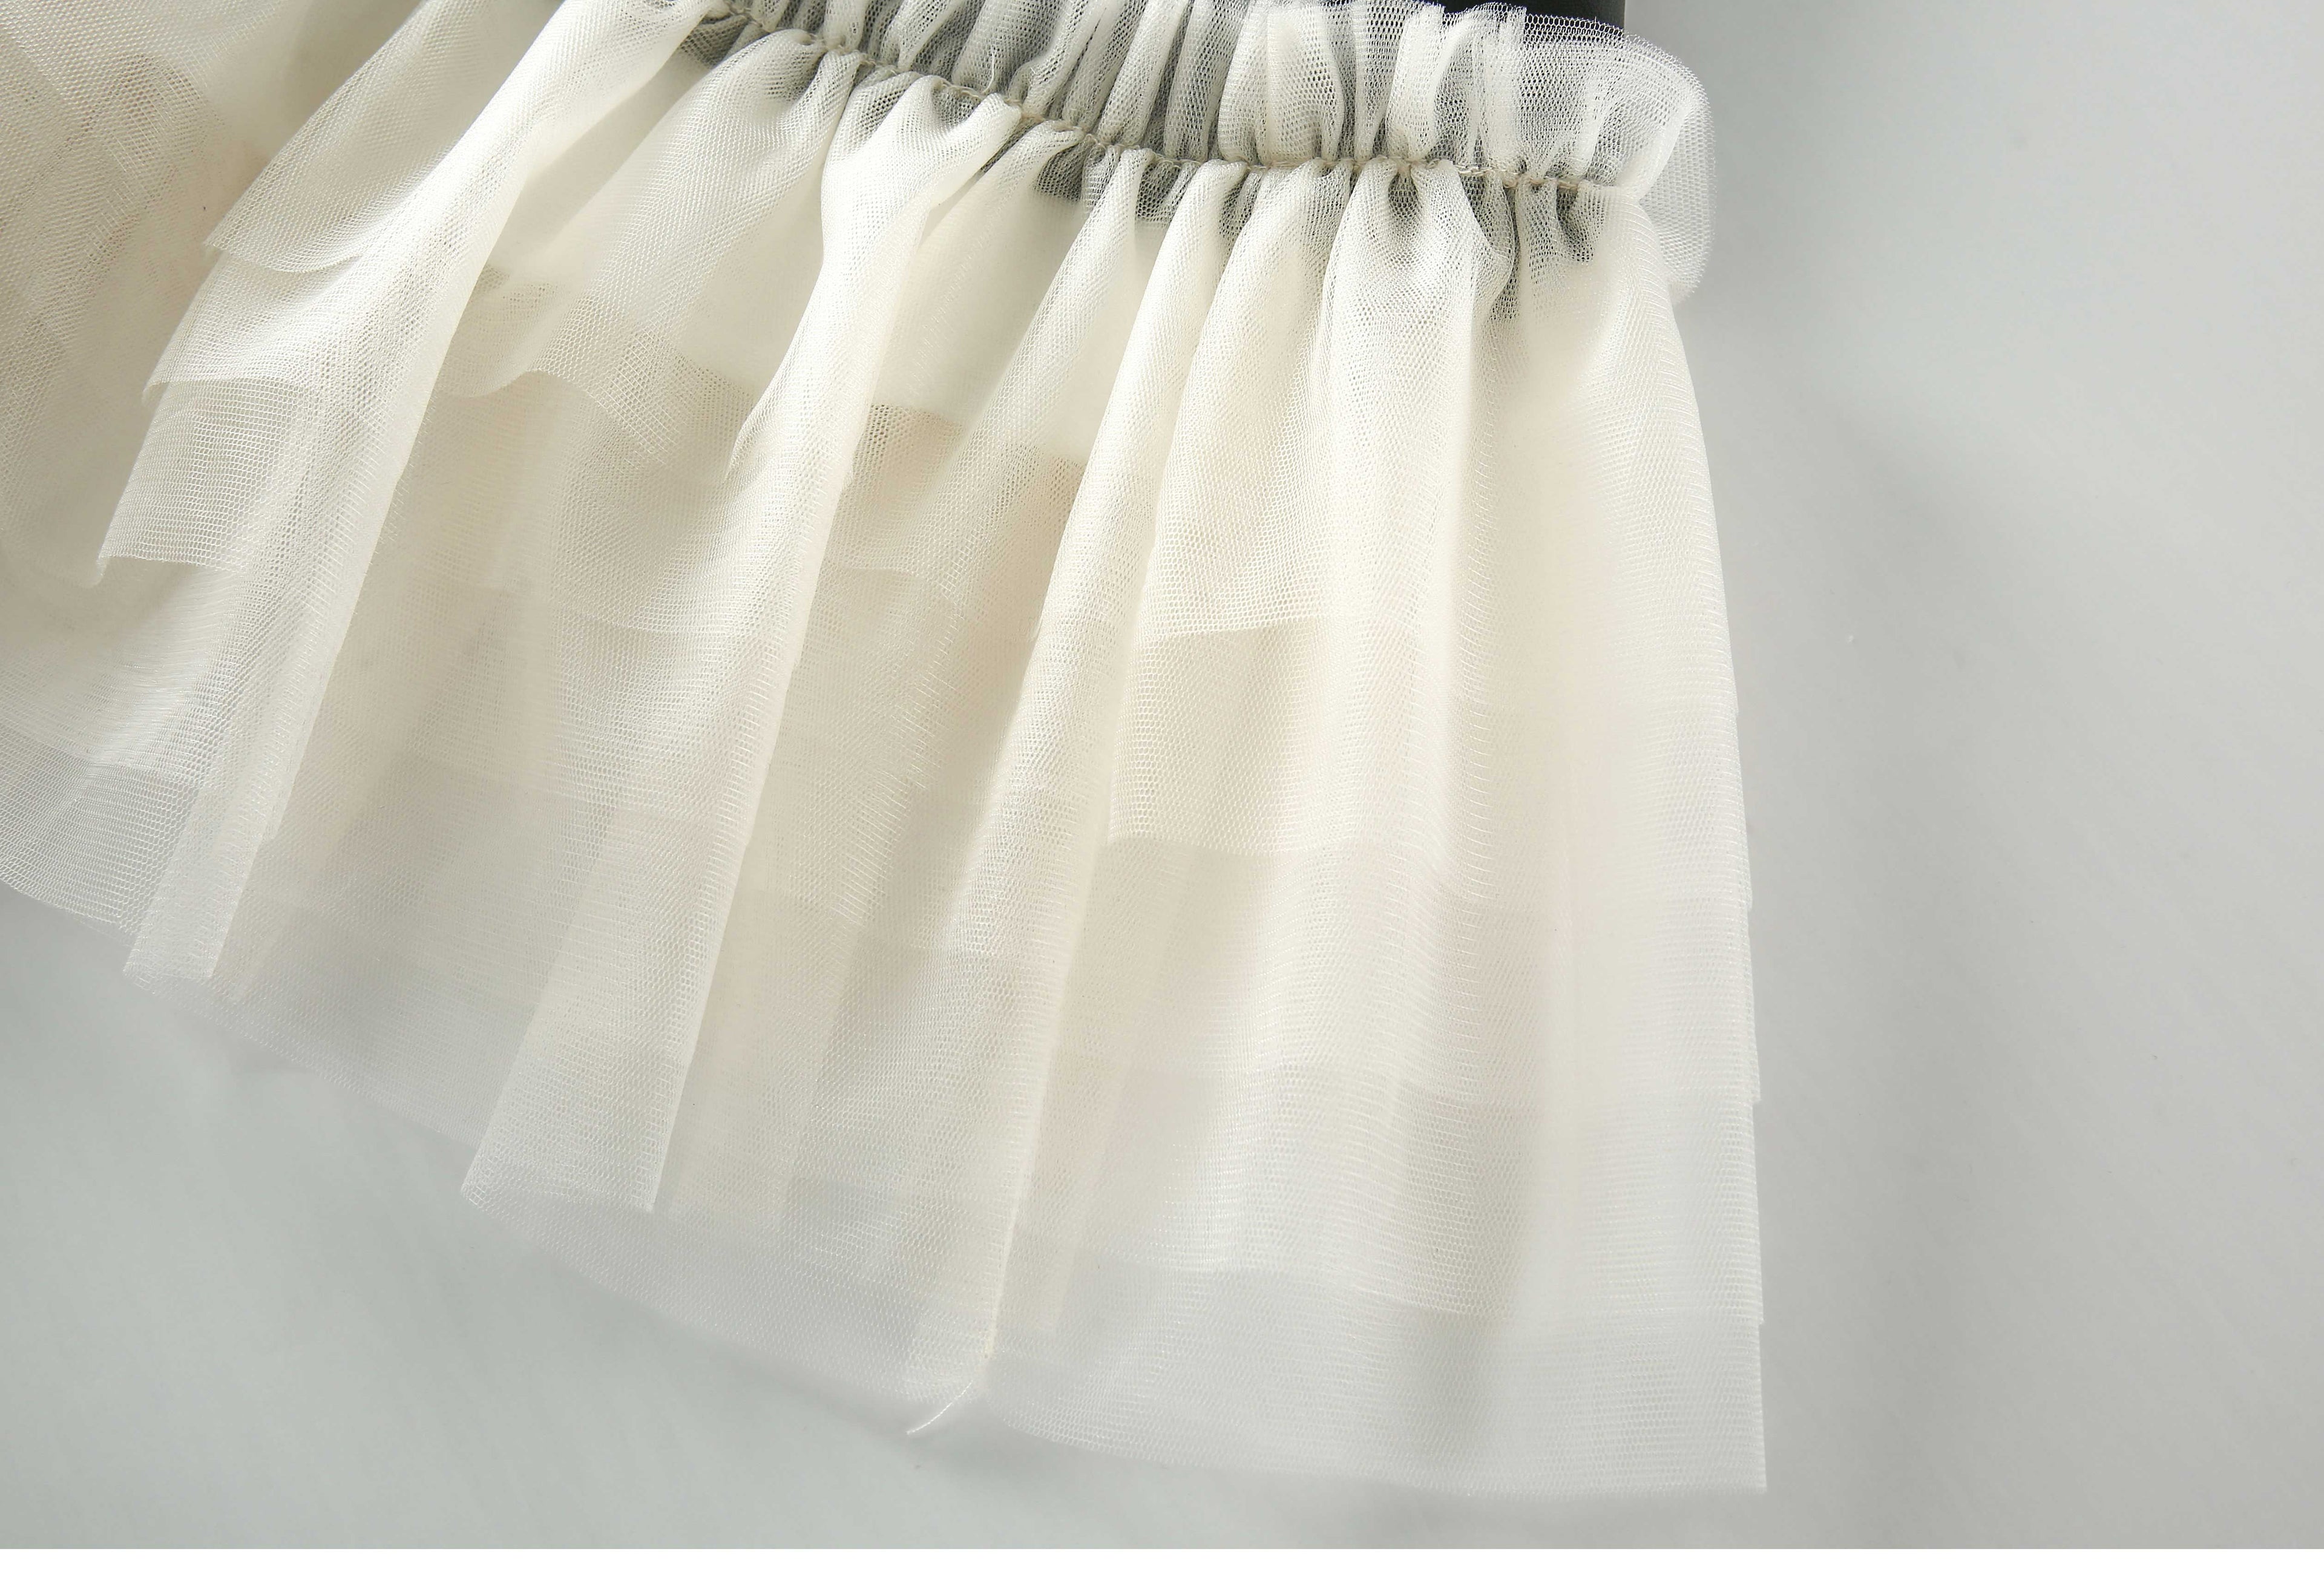 A solid color Leather Strap Skirt Dress with ruffles by Maramalive™.